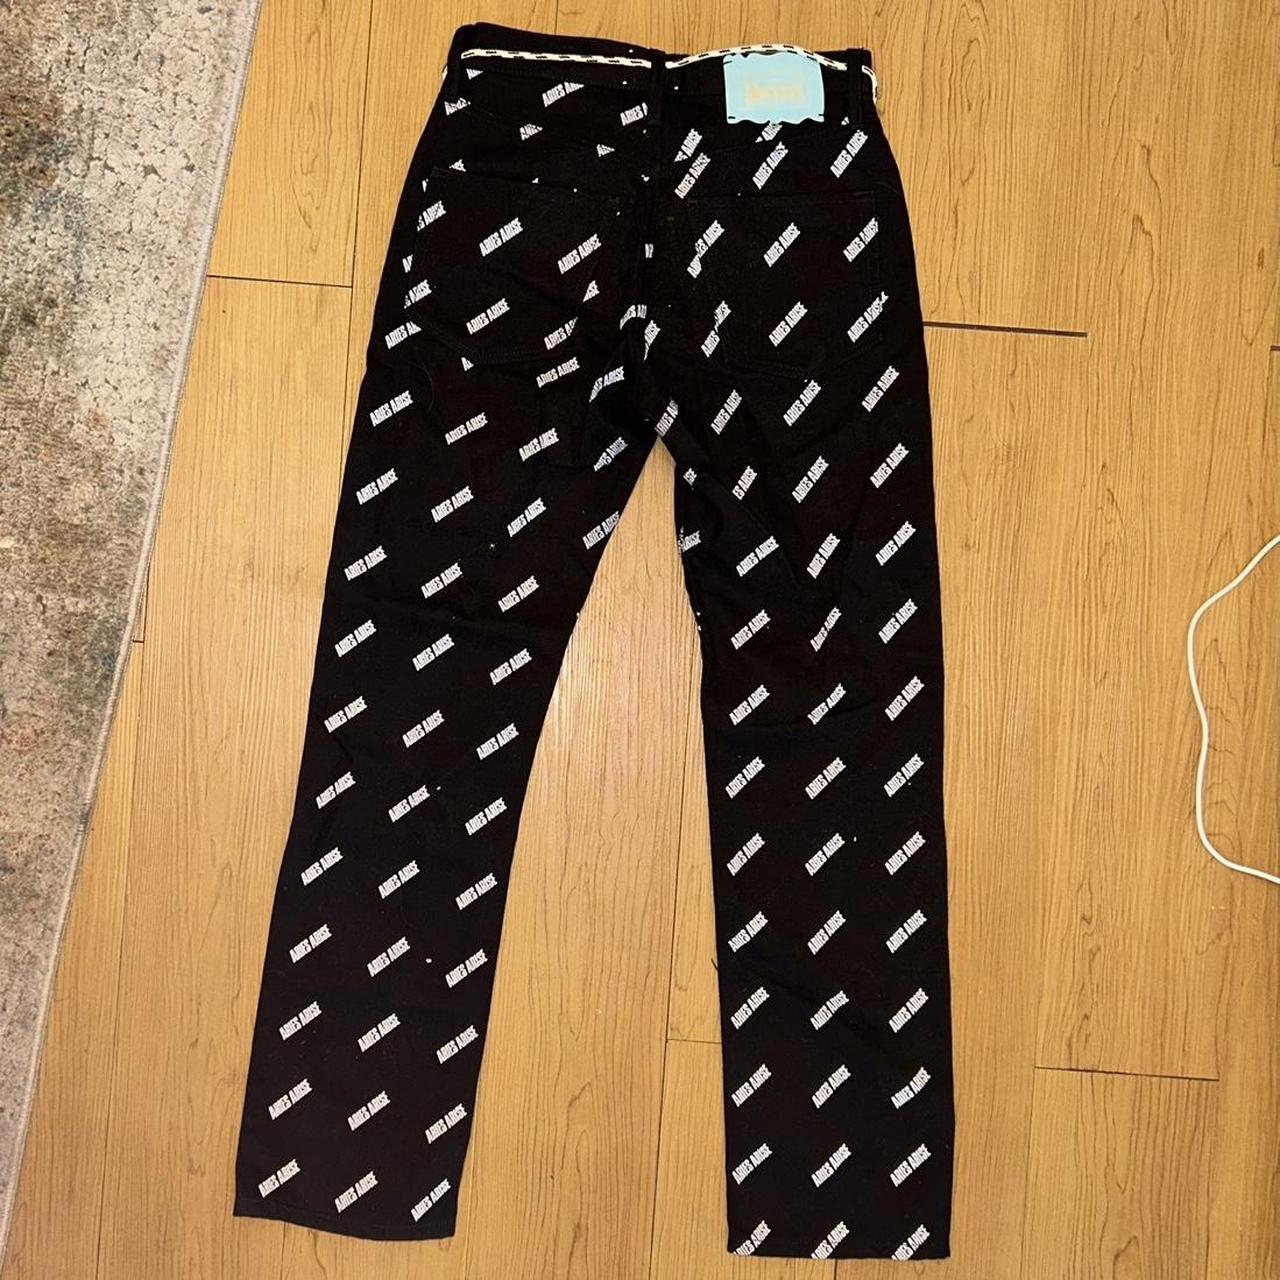 Aries Arise Women's Black and White Jeans (3)